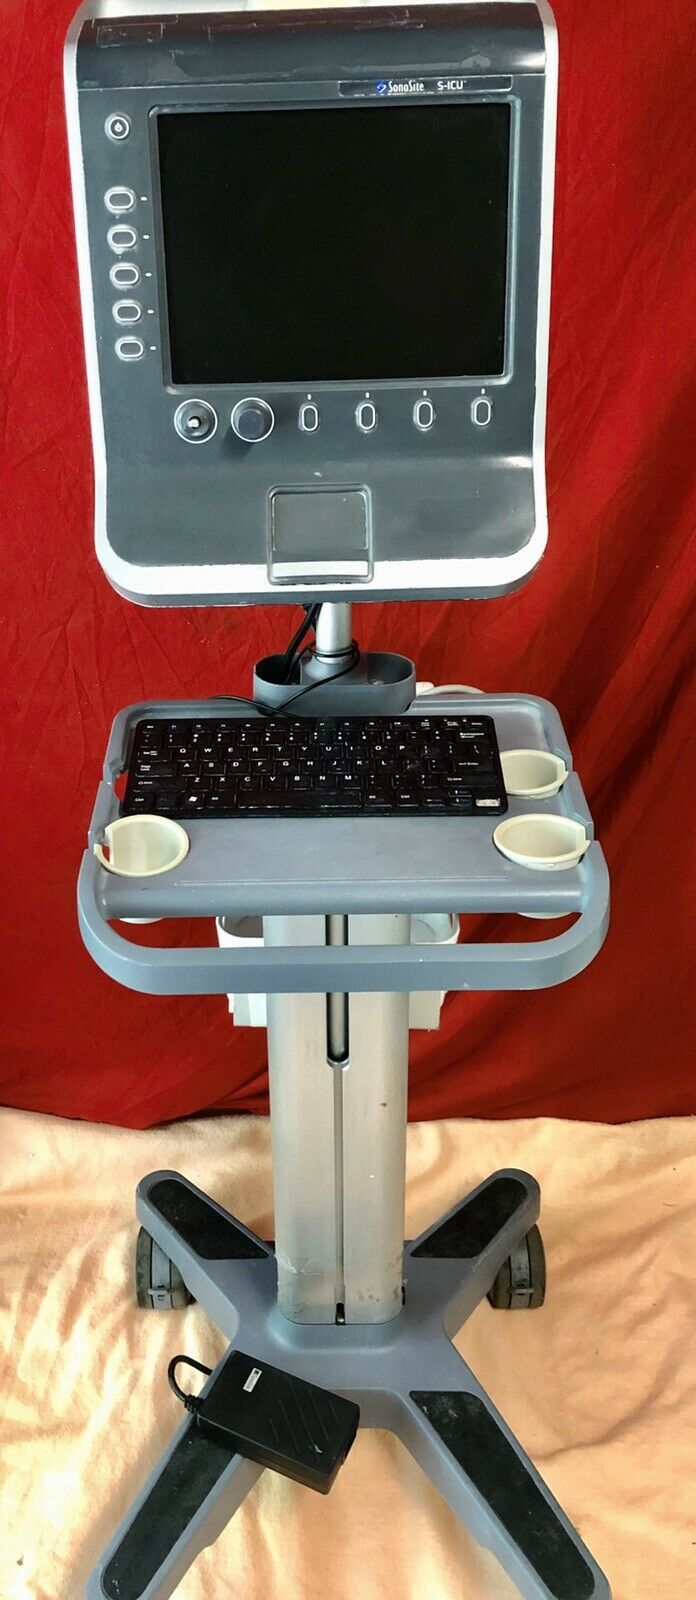 SonoSite S-ICU ultrasound system, 2011-09, P07577 With Cart DIAGNOSTIC ULTRASOUND MACHINES FOR SALE